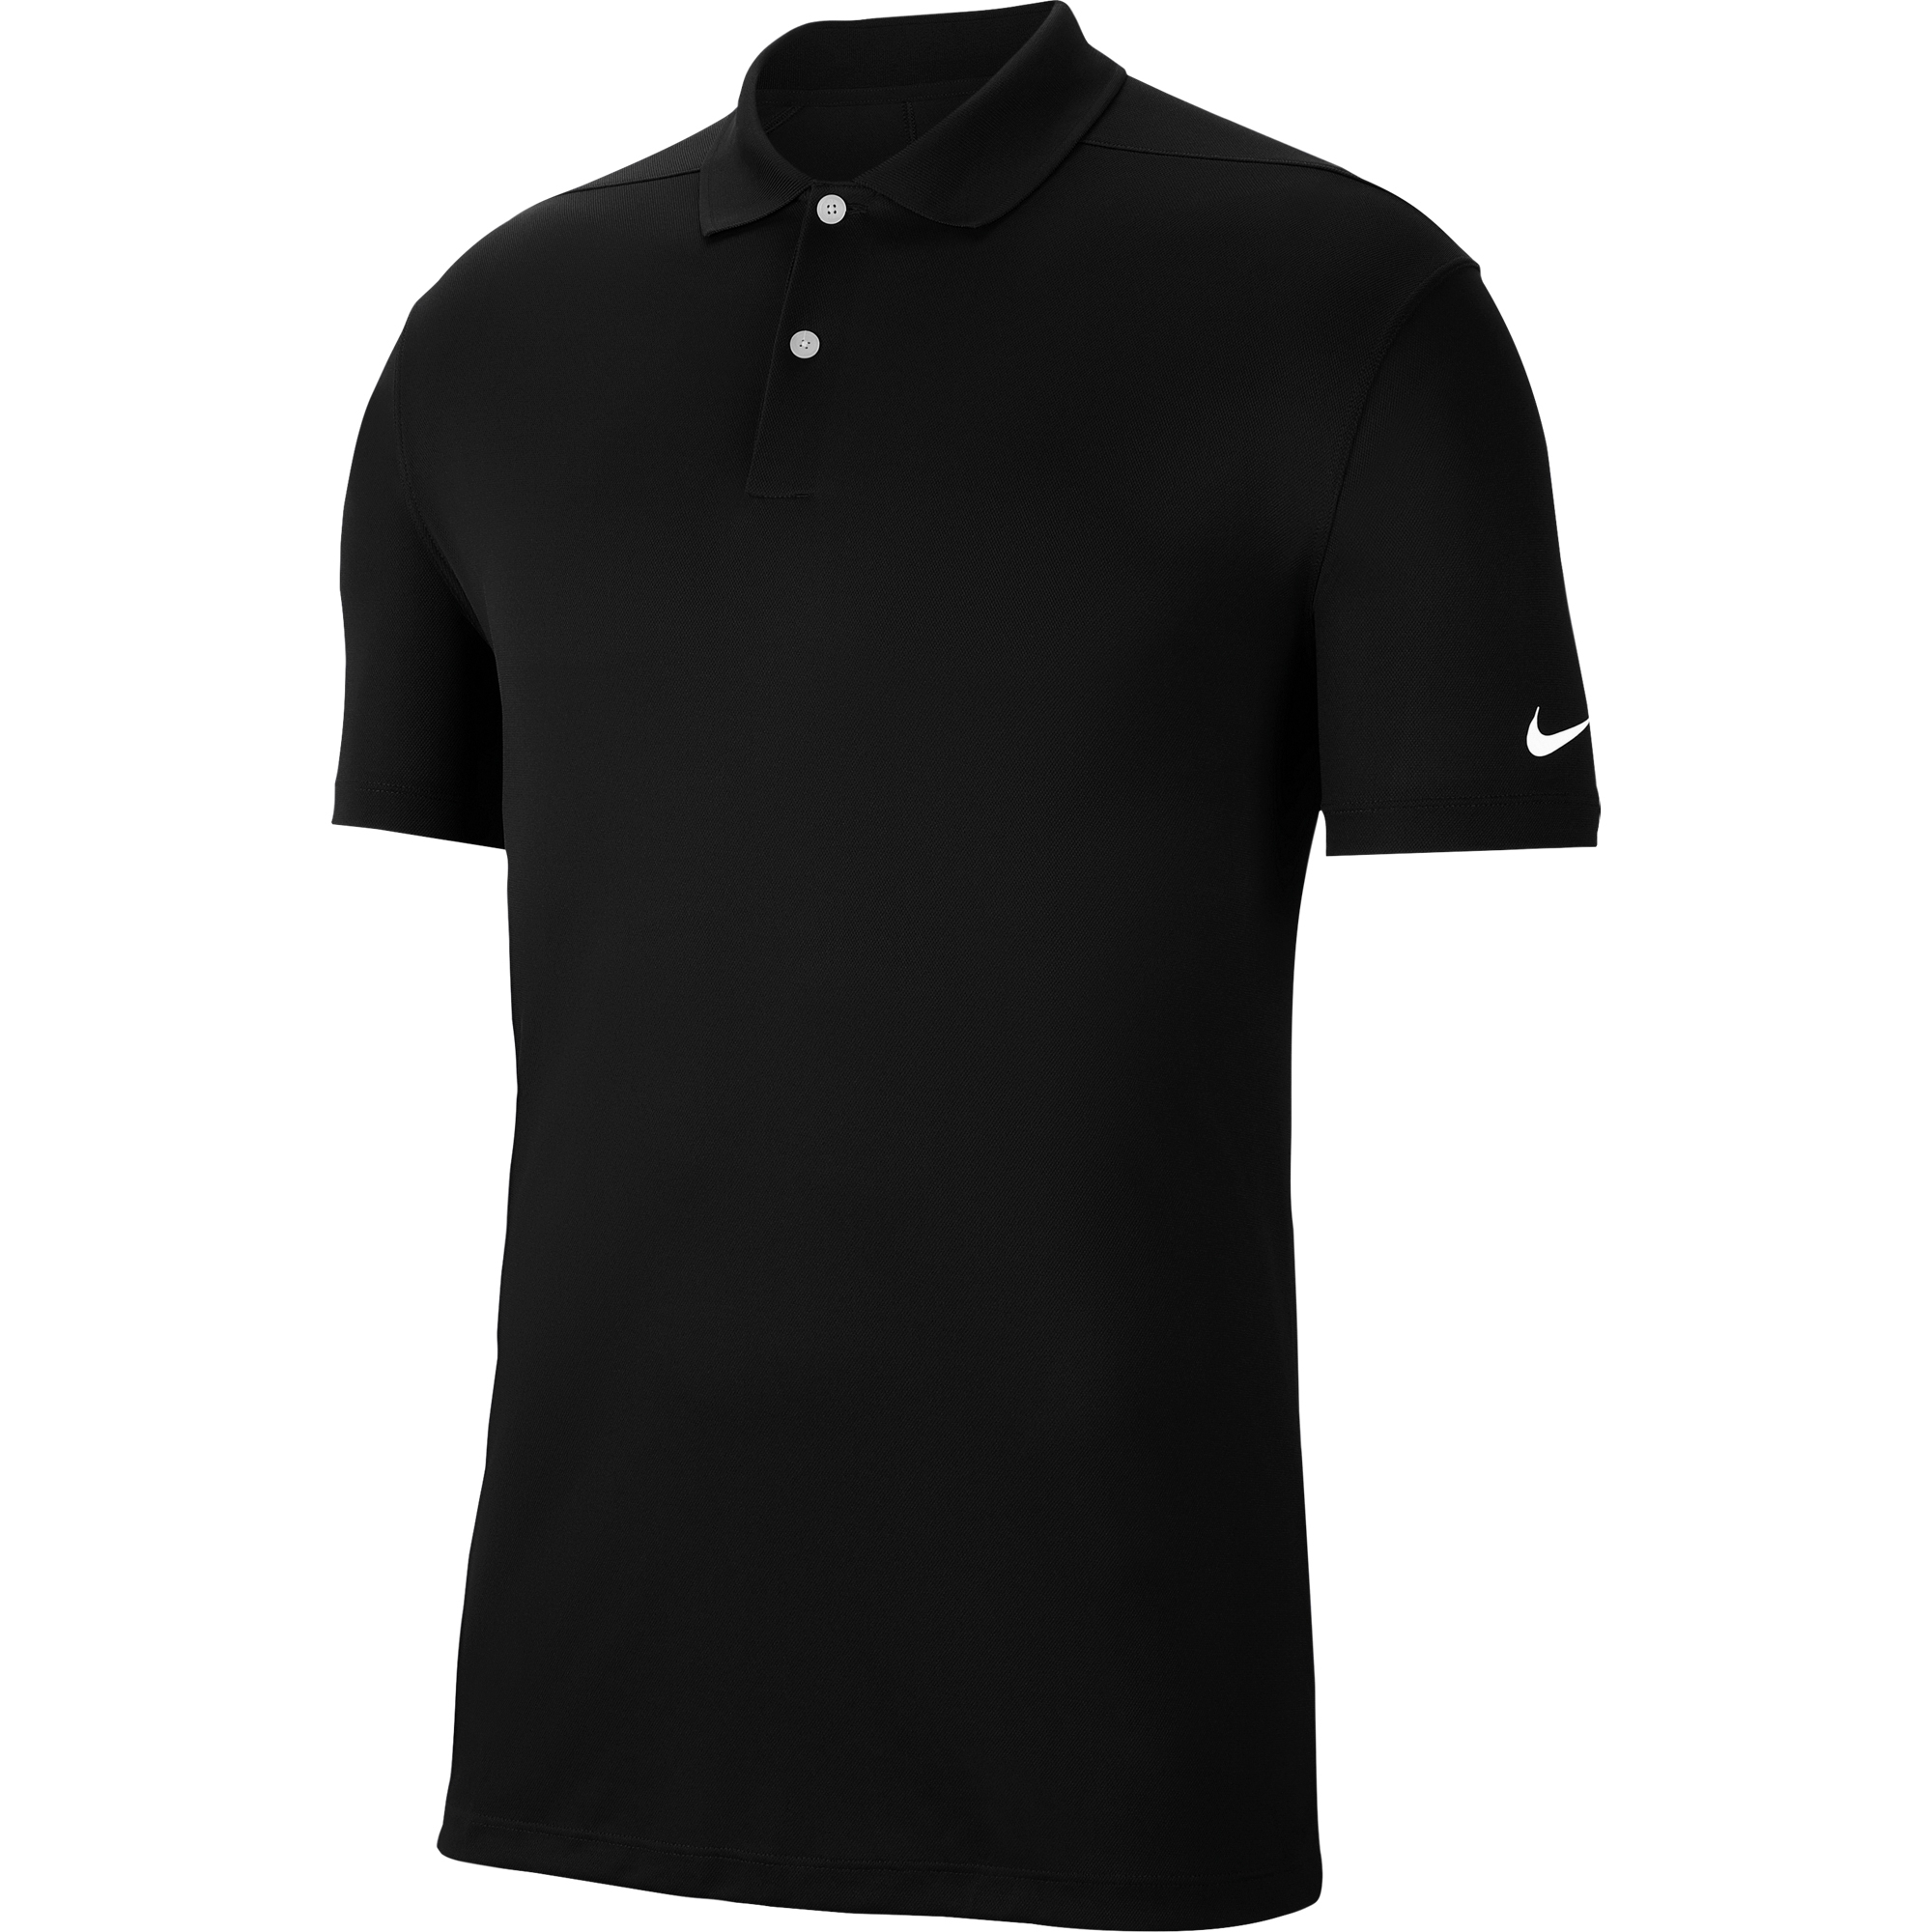 Nike Mens Dry Fit Solid Victory Golf Polo Shirt M- Chest 37.5-41